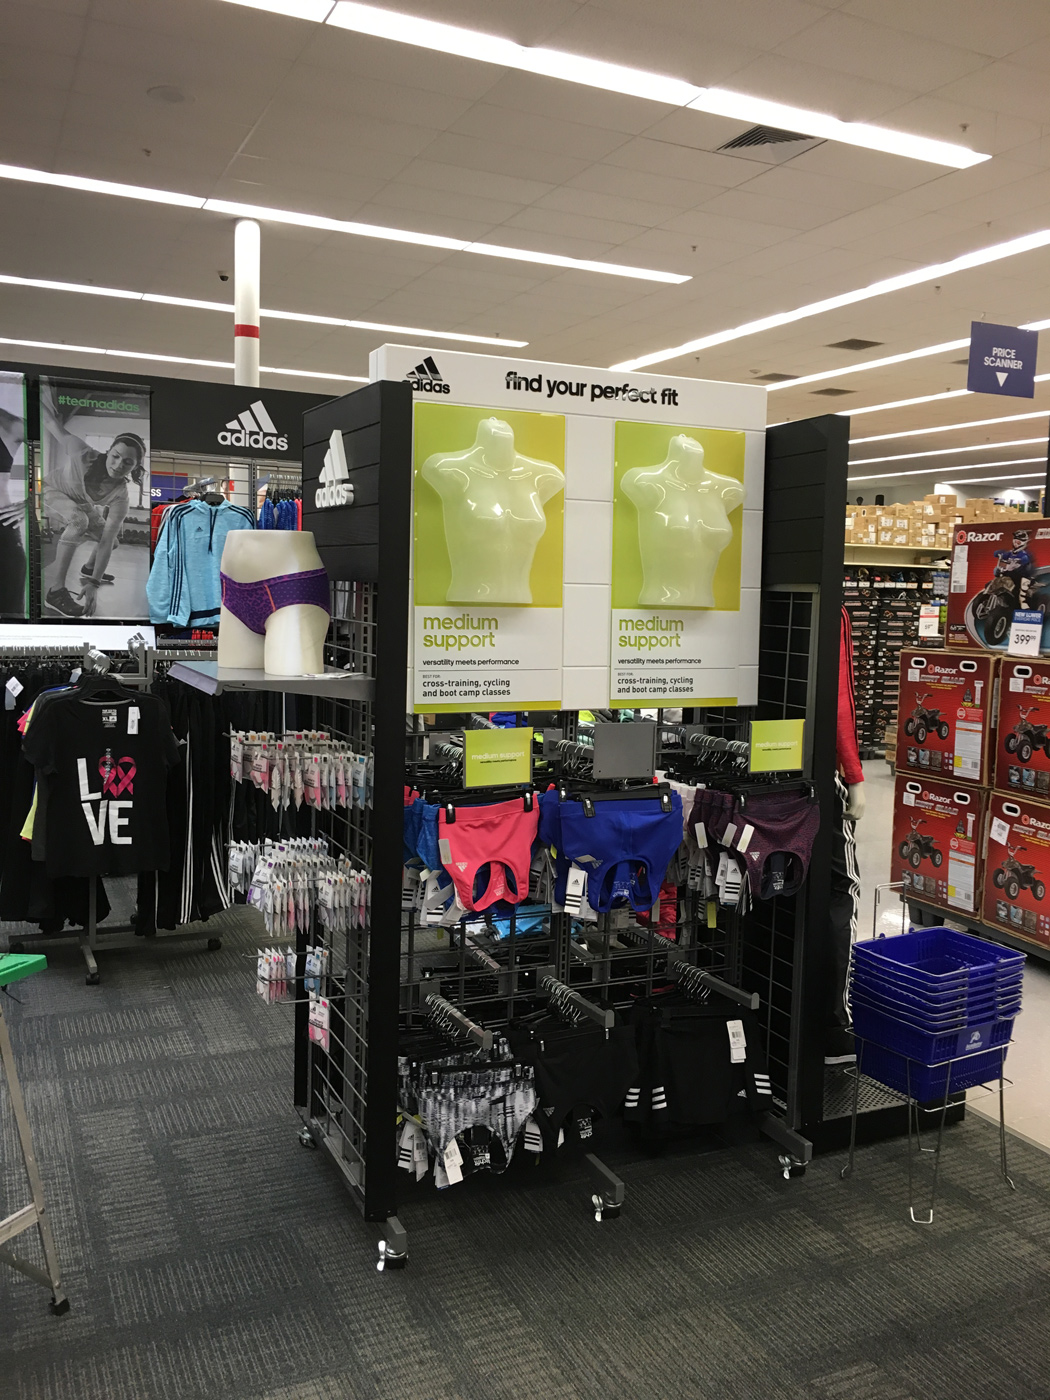 Nationwide Fixture Installations Inc Adidas Case Study Signage Maintenance Shop-in-Shop Retail Rollouts